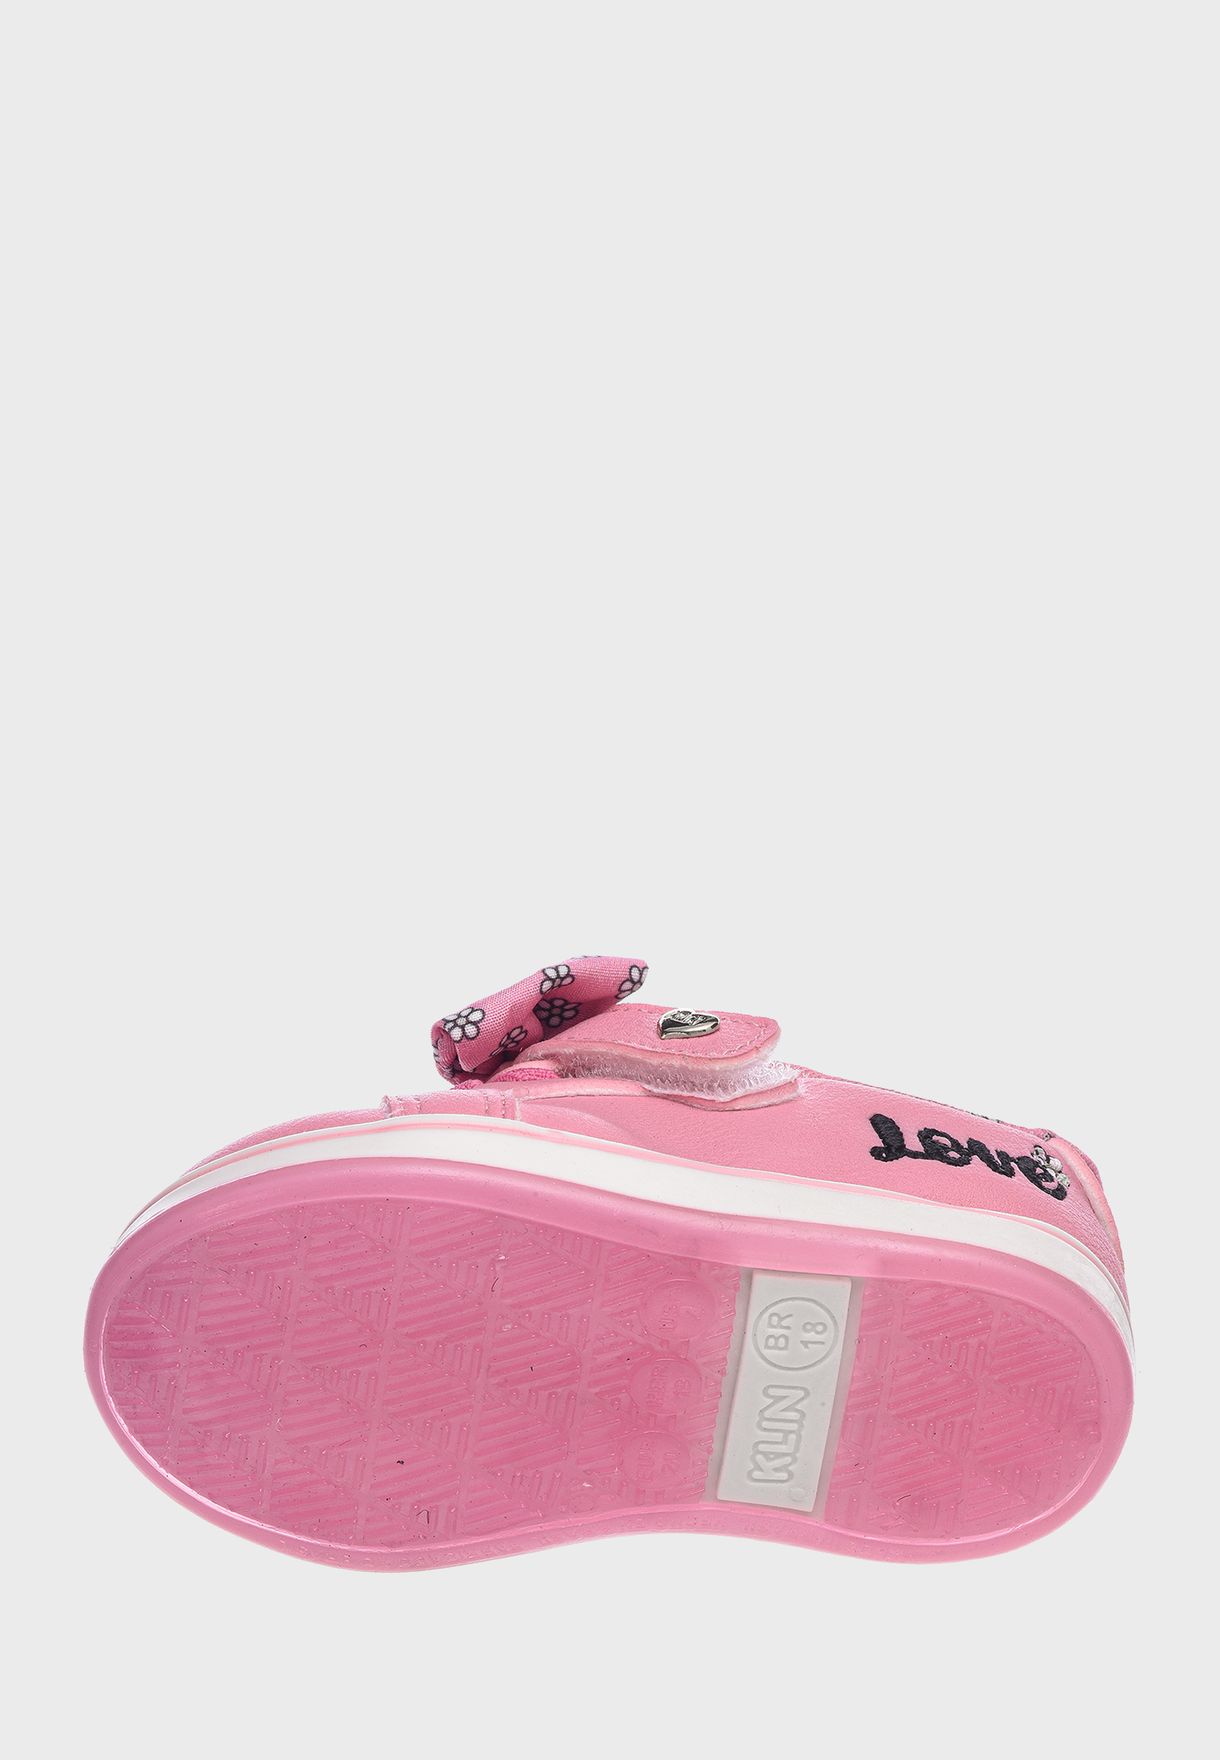 Kids Front Bow Low Top Sneakers